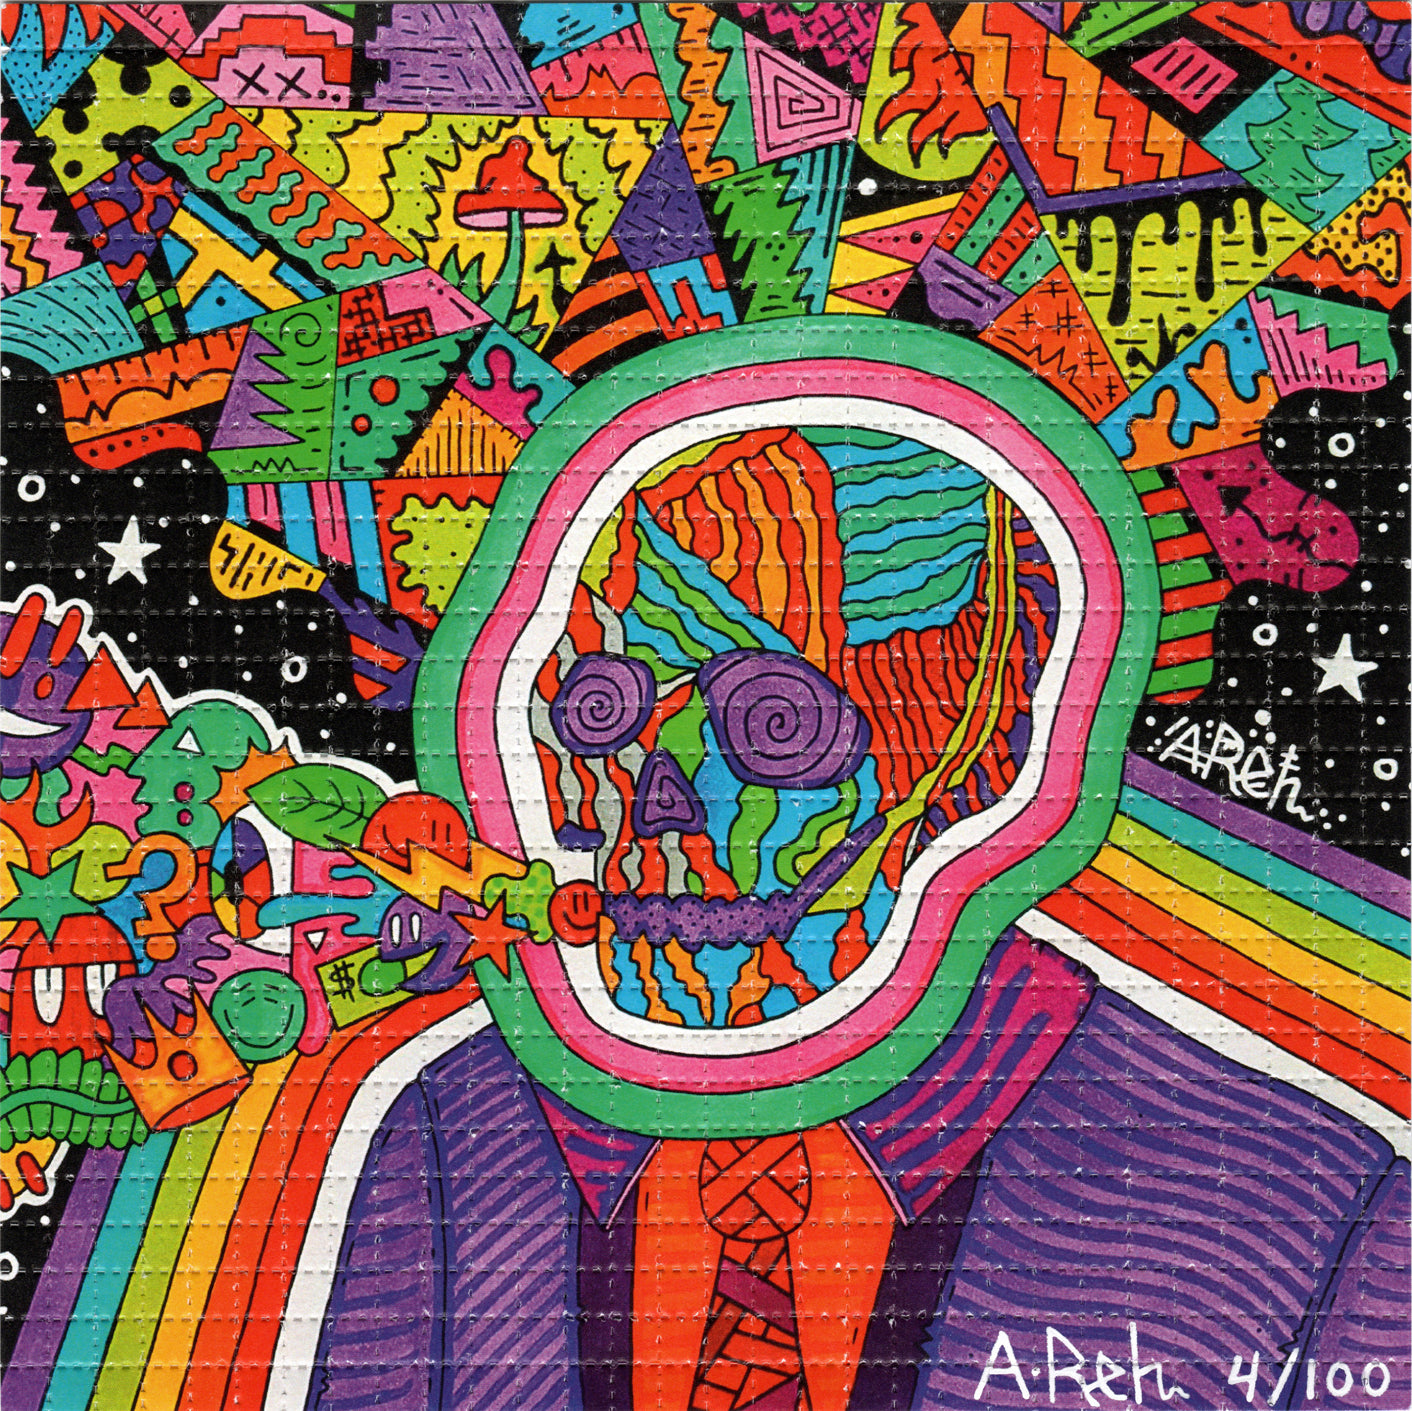 Areh Skull by Aaron Rehschuh Areh SIGNED Limited Edition LSD blotter art print